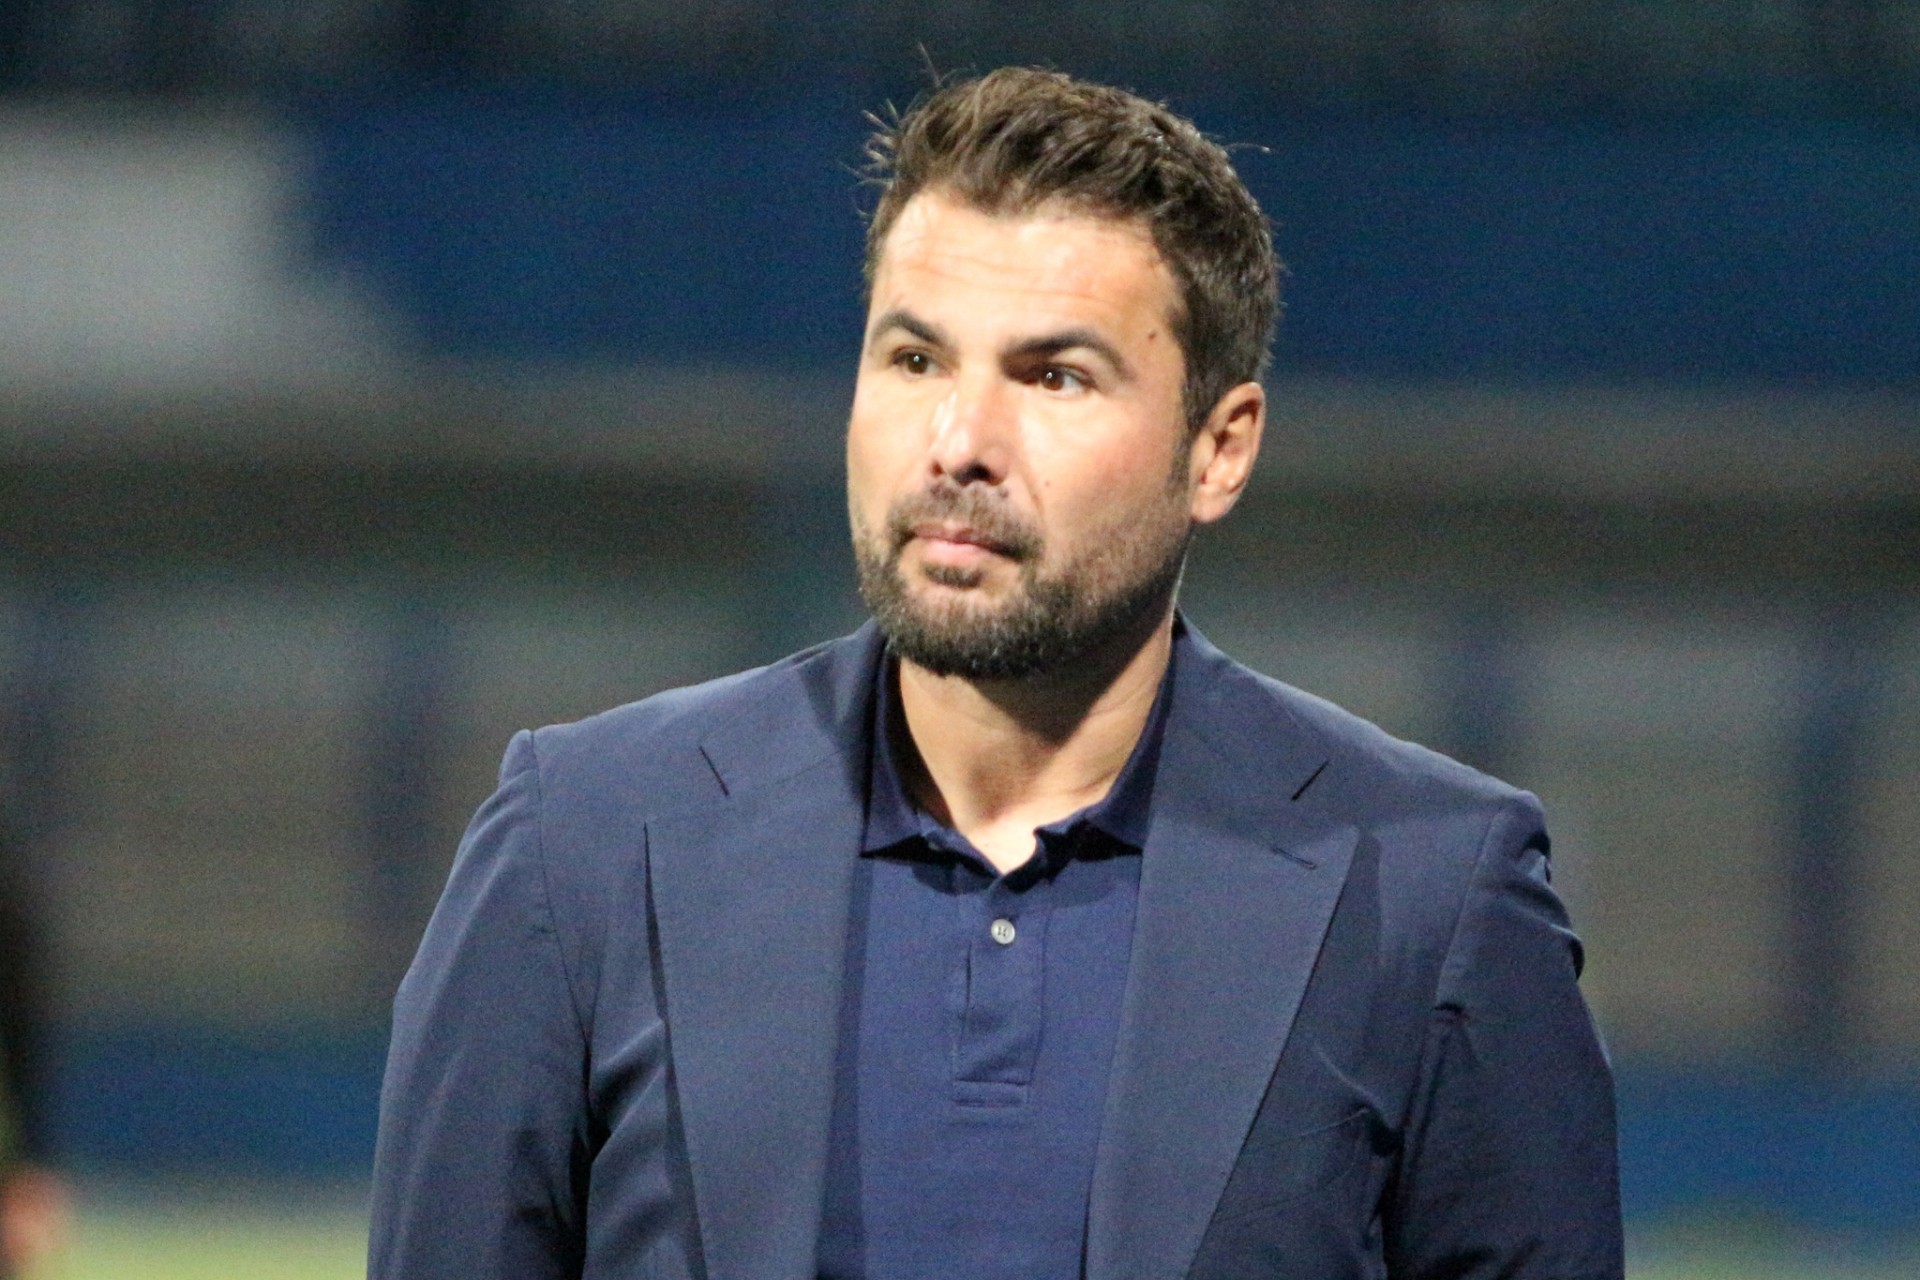 Neftchi had said goodbye to Adrian Mutu and appealed to the fans